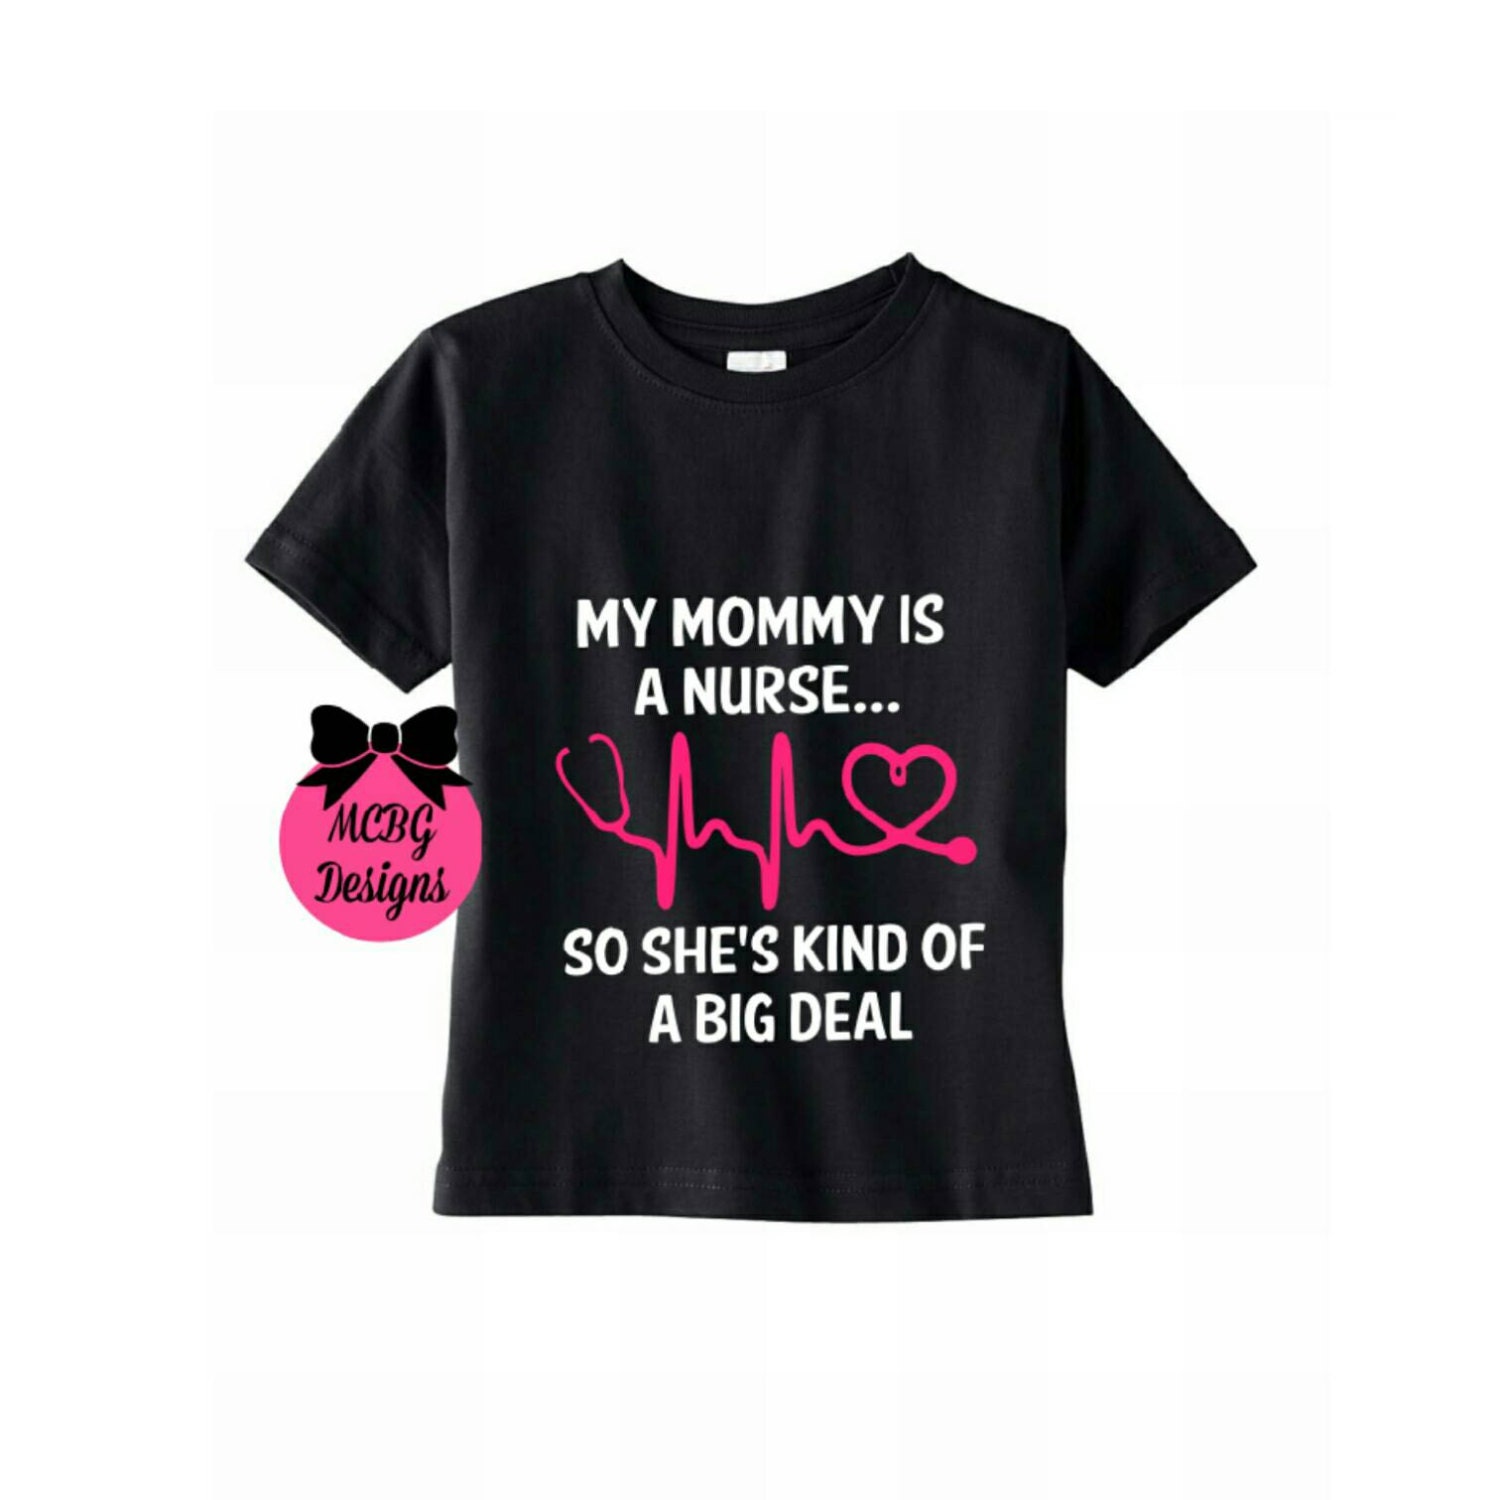 My mommy is a nurse so she's kind of a big deal baby | Etsy